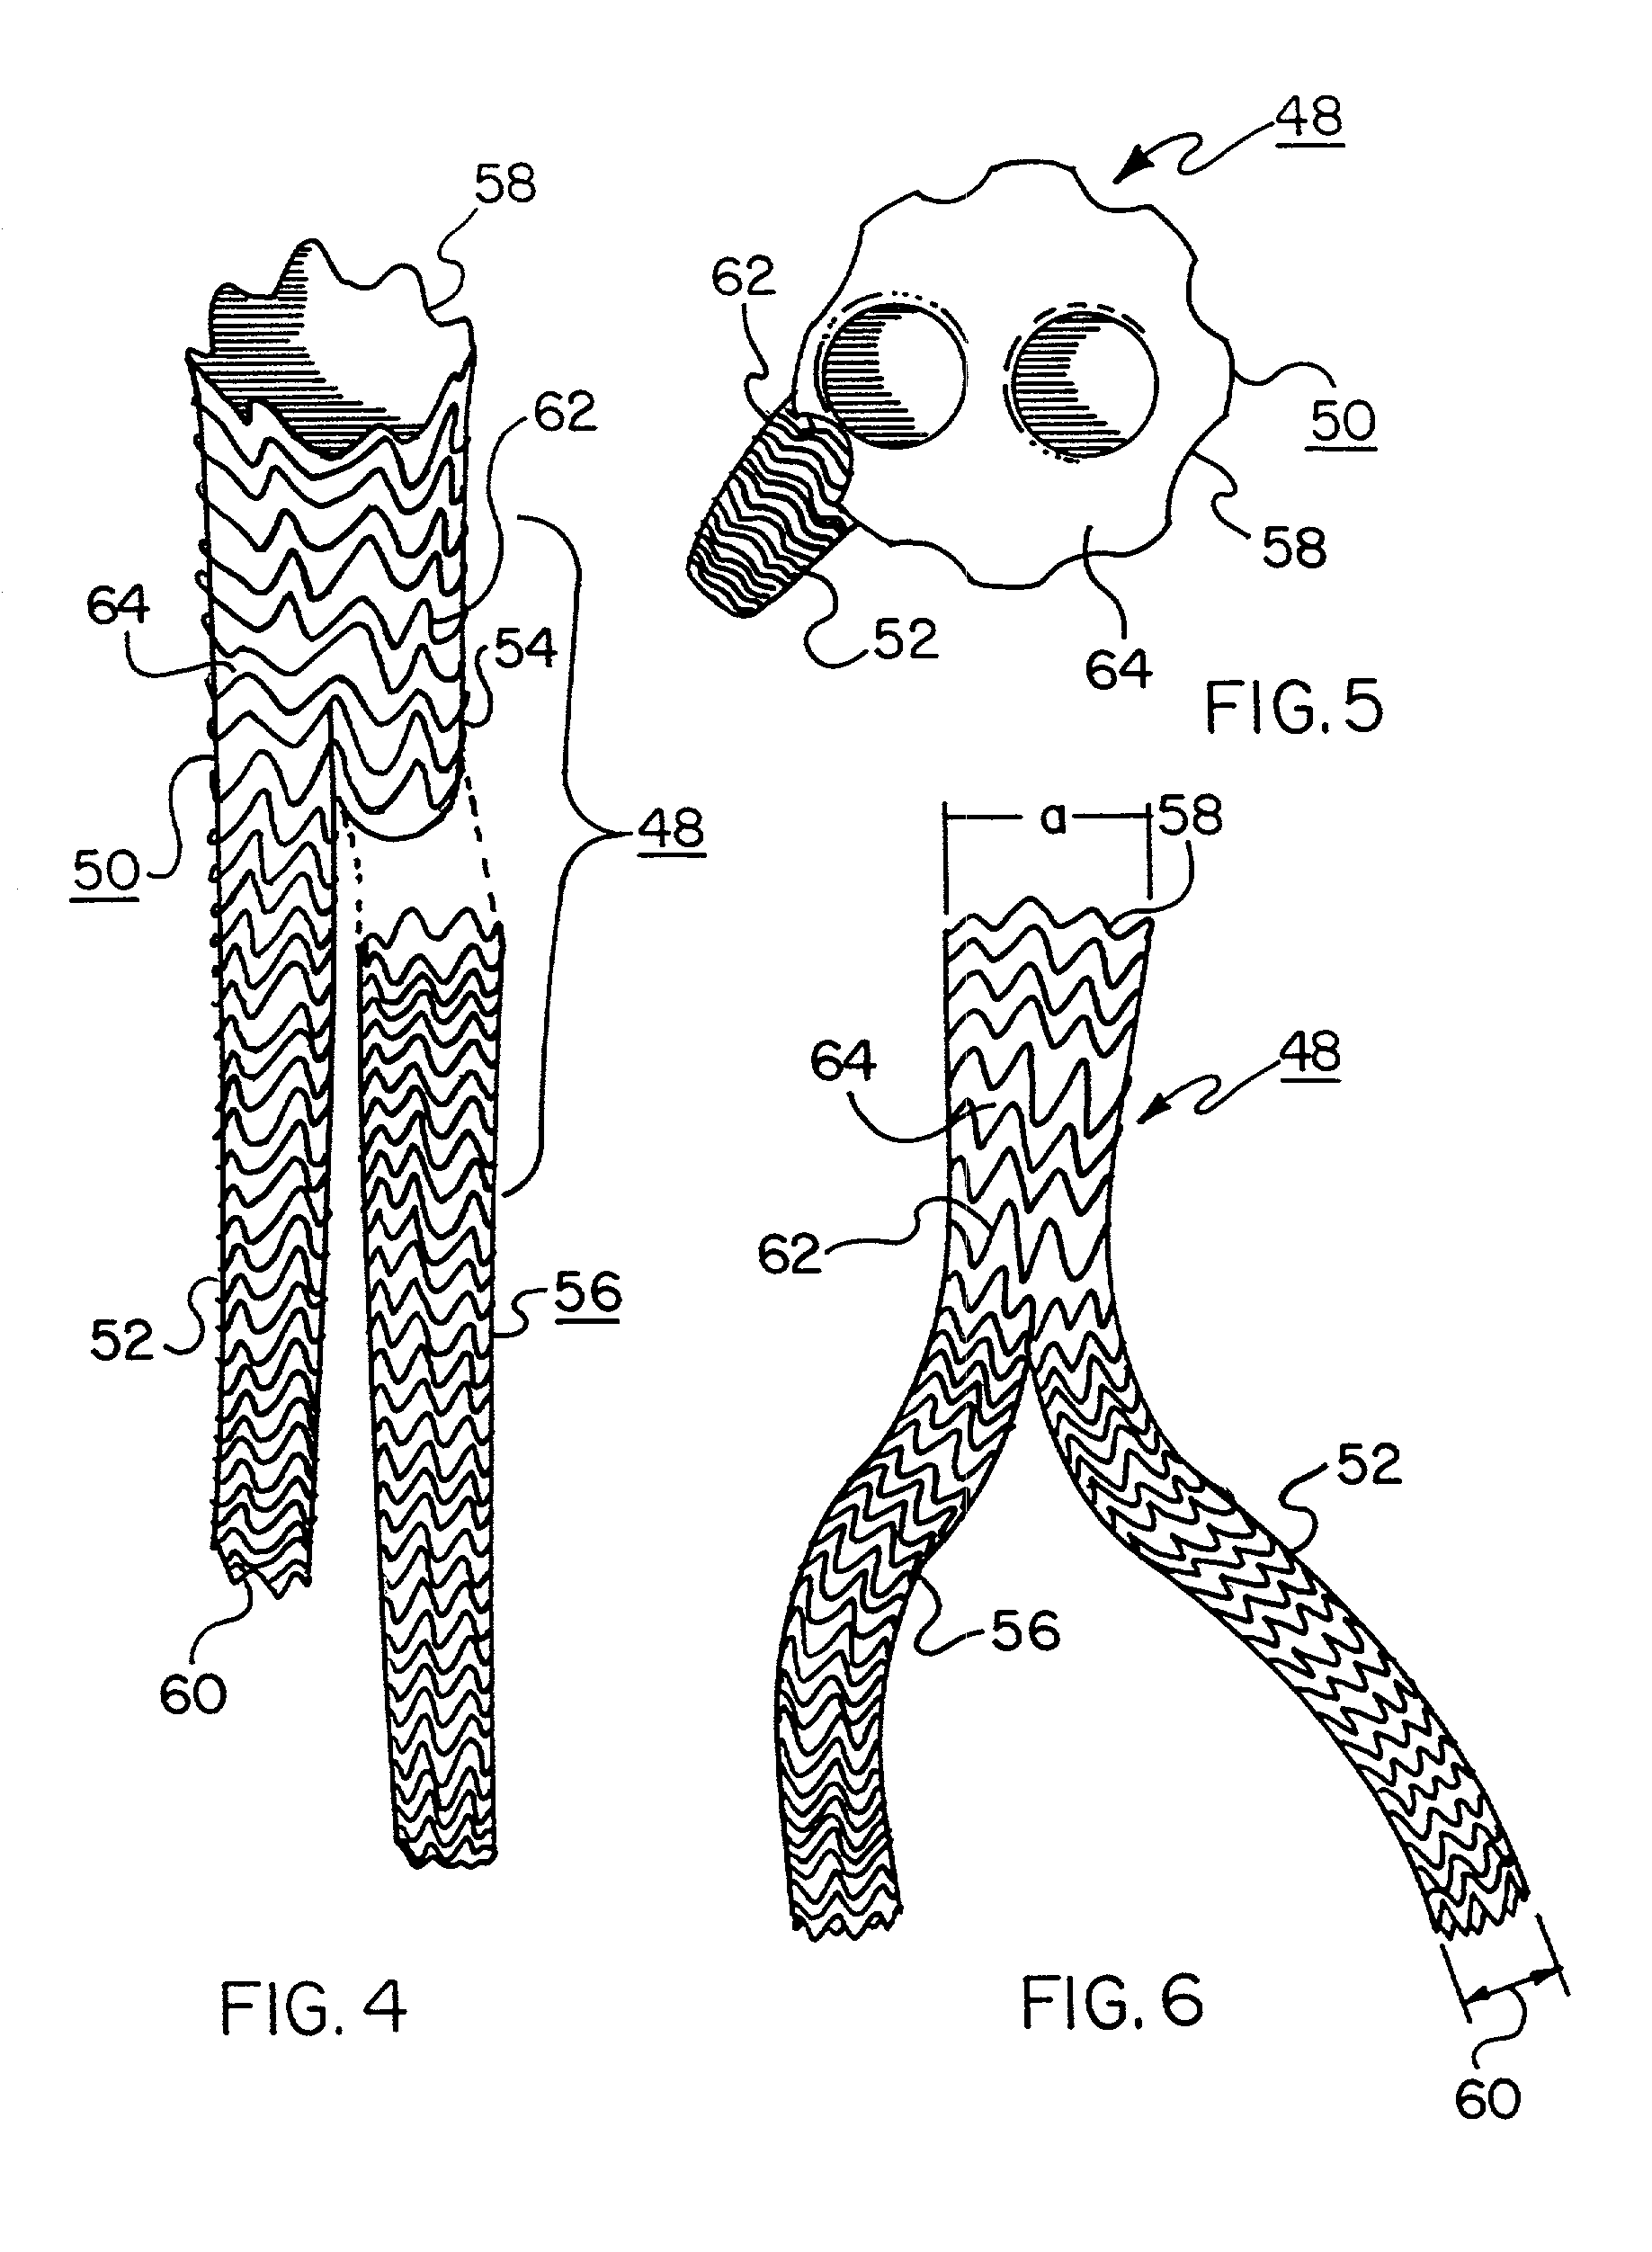 Method of producing low profile stent and graft combination